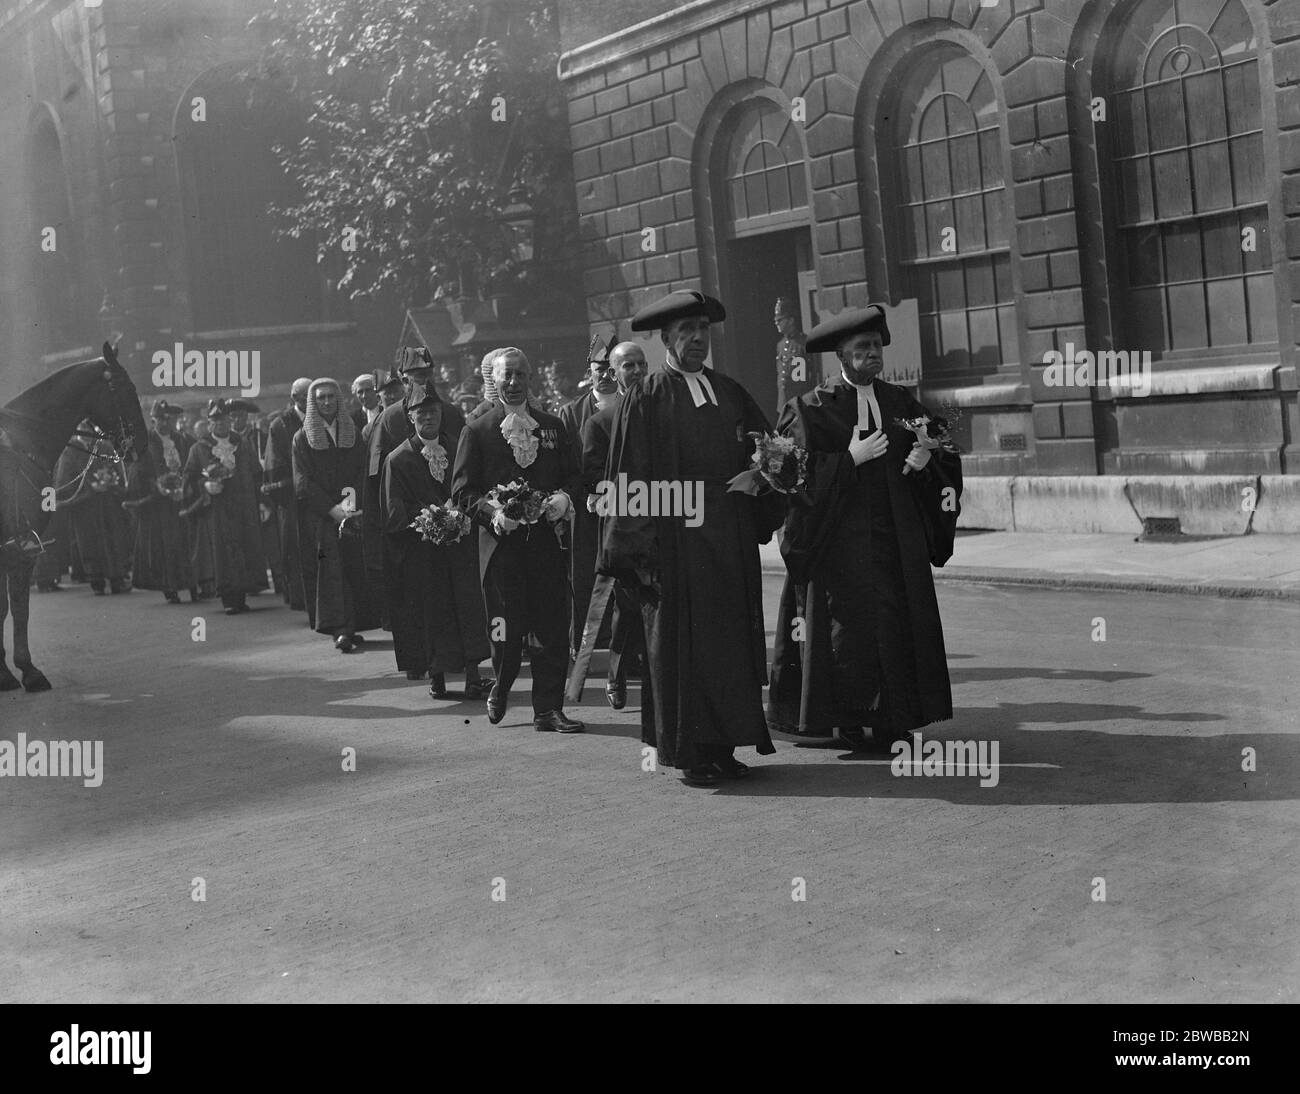 Election of the New Lord Mayor of London . Aldermen and Sheriffs carrying bouquets on their way to services at the Church of St Lawrence Jewry . 29th September 1936 Stock Photo